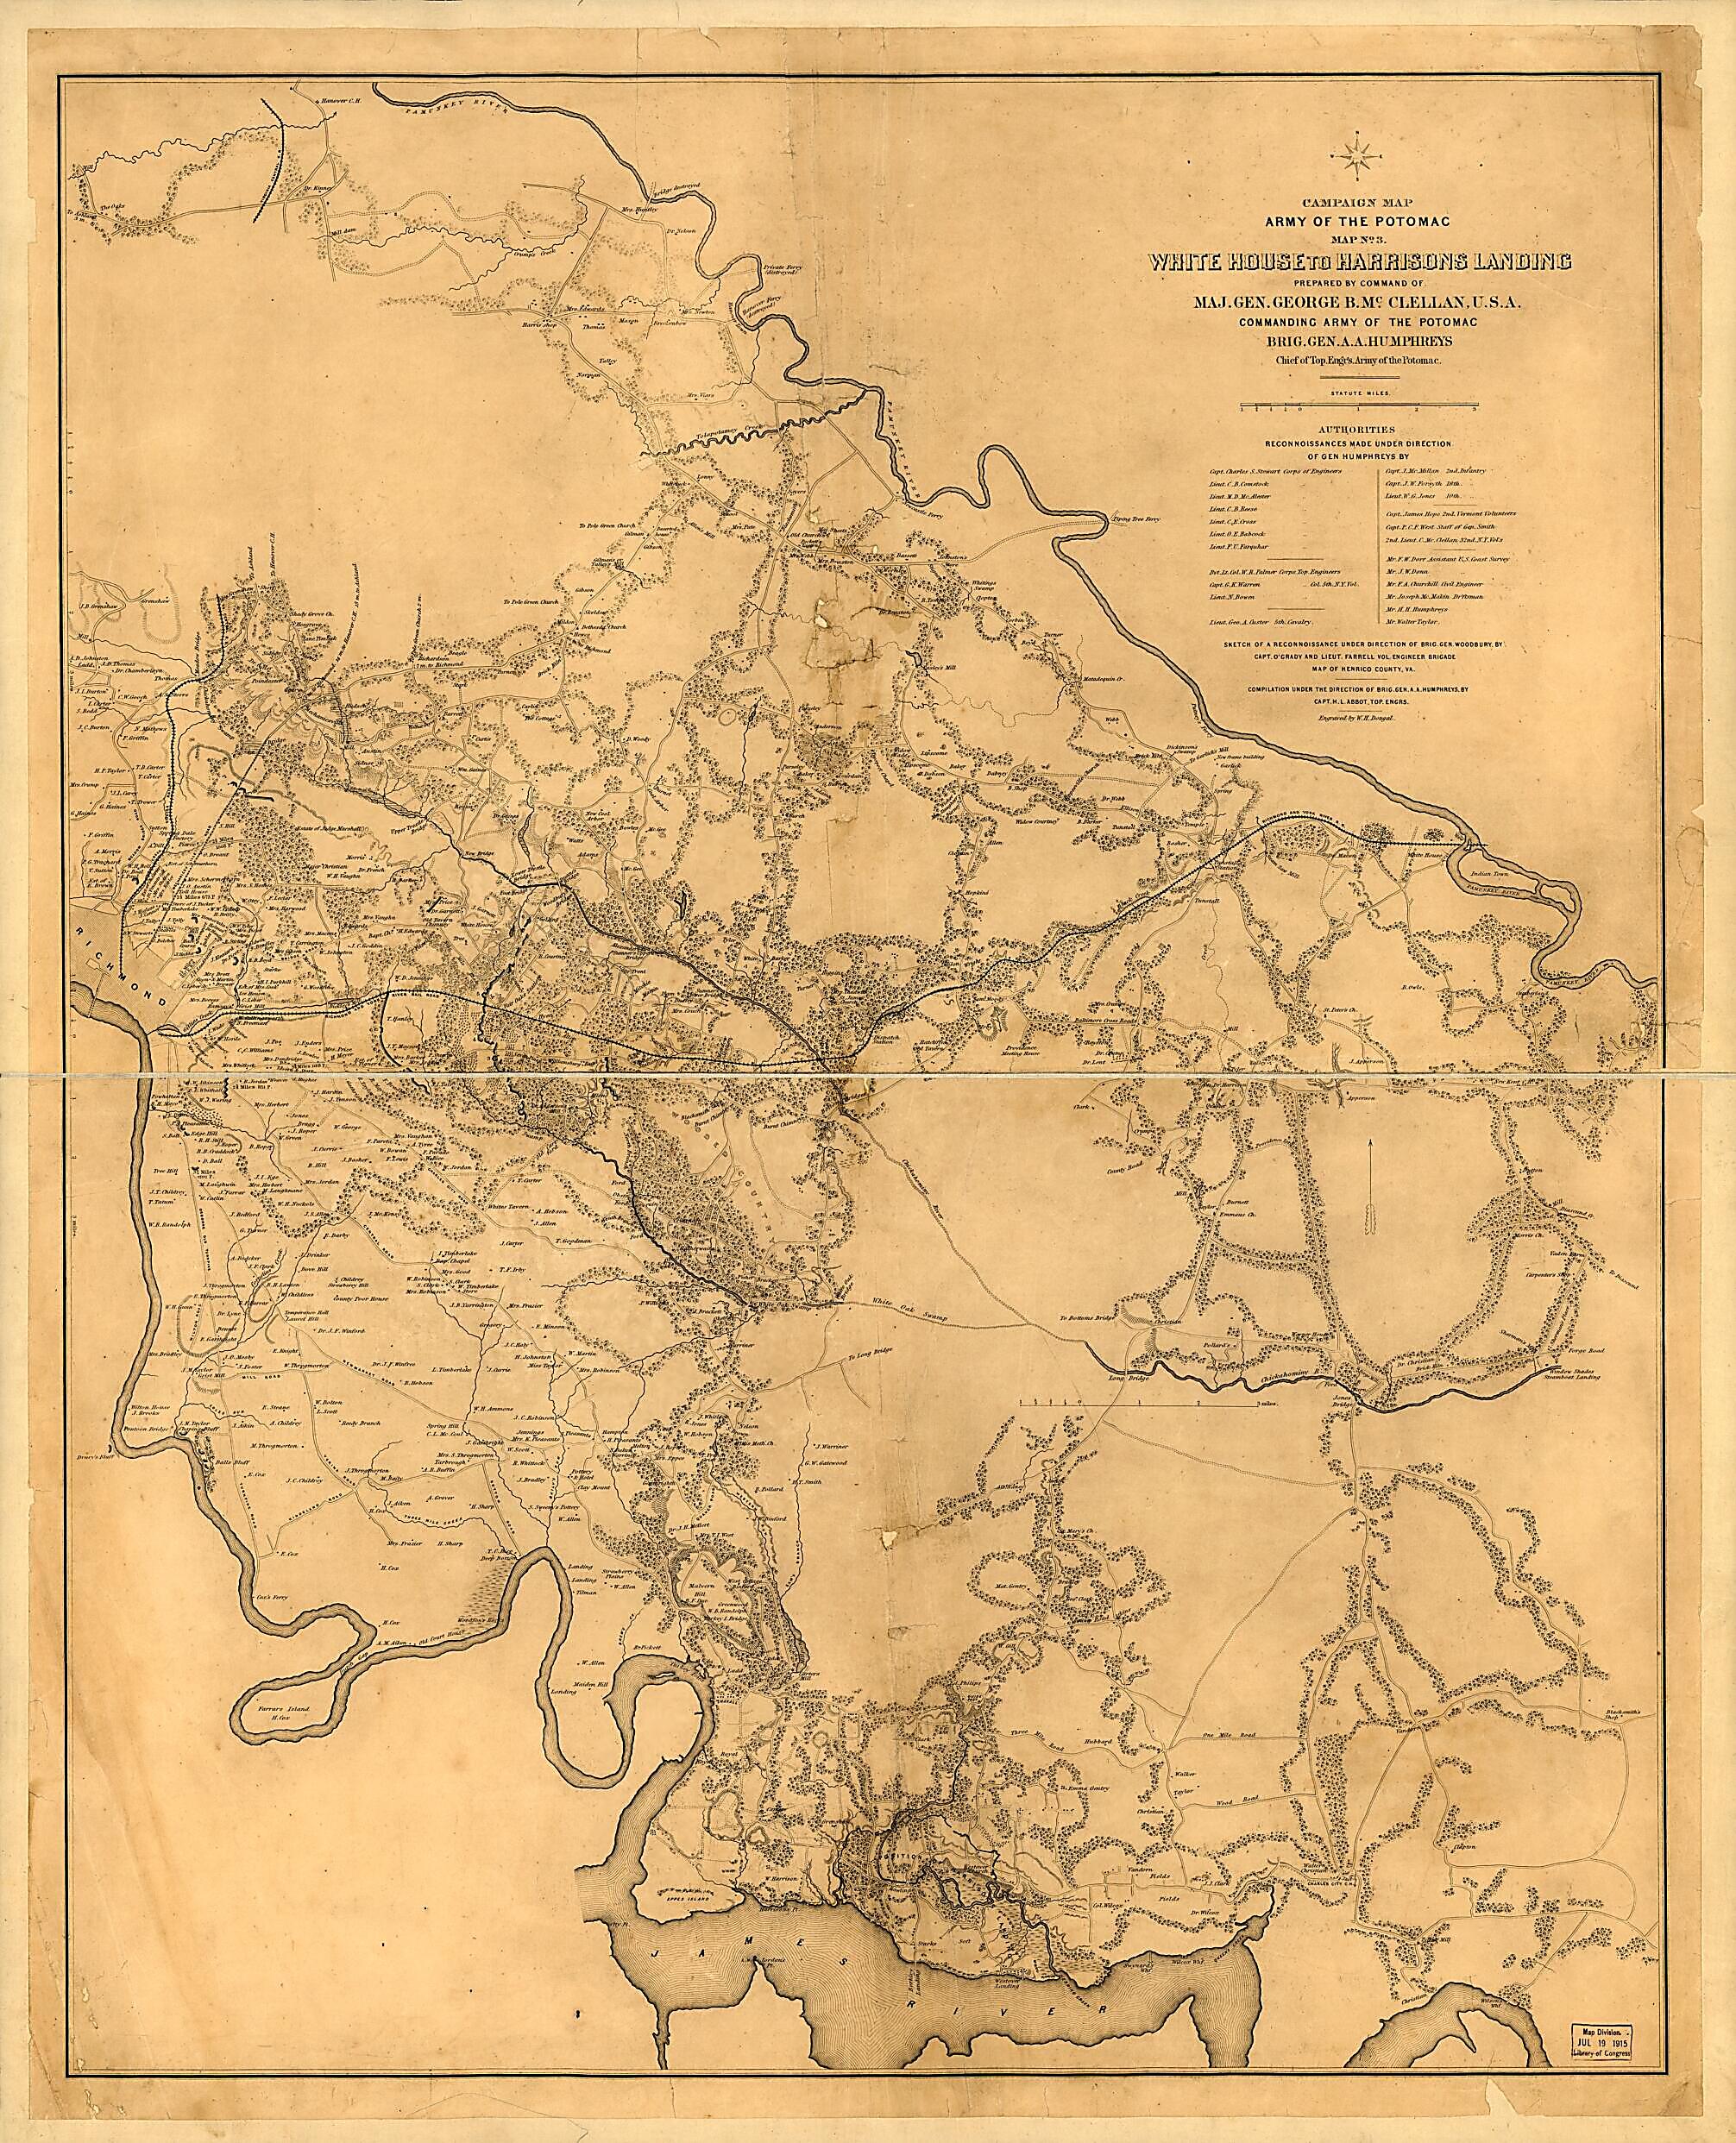 This old map of White House to Harrisons Landing from 1862 was created by Henry L. Abbot in 1862